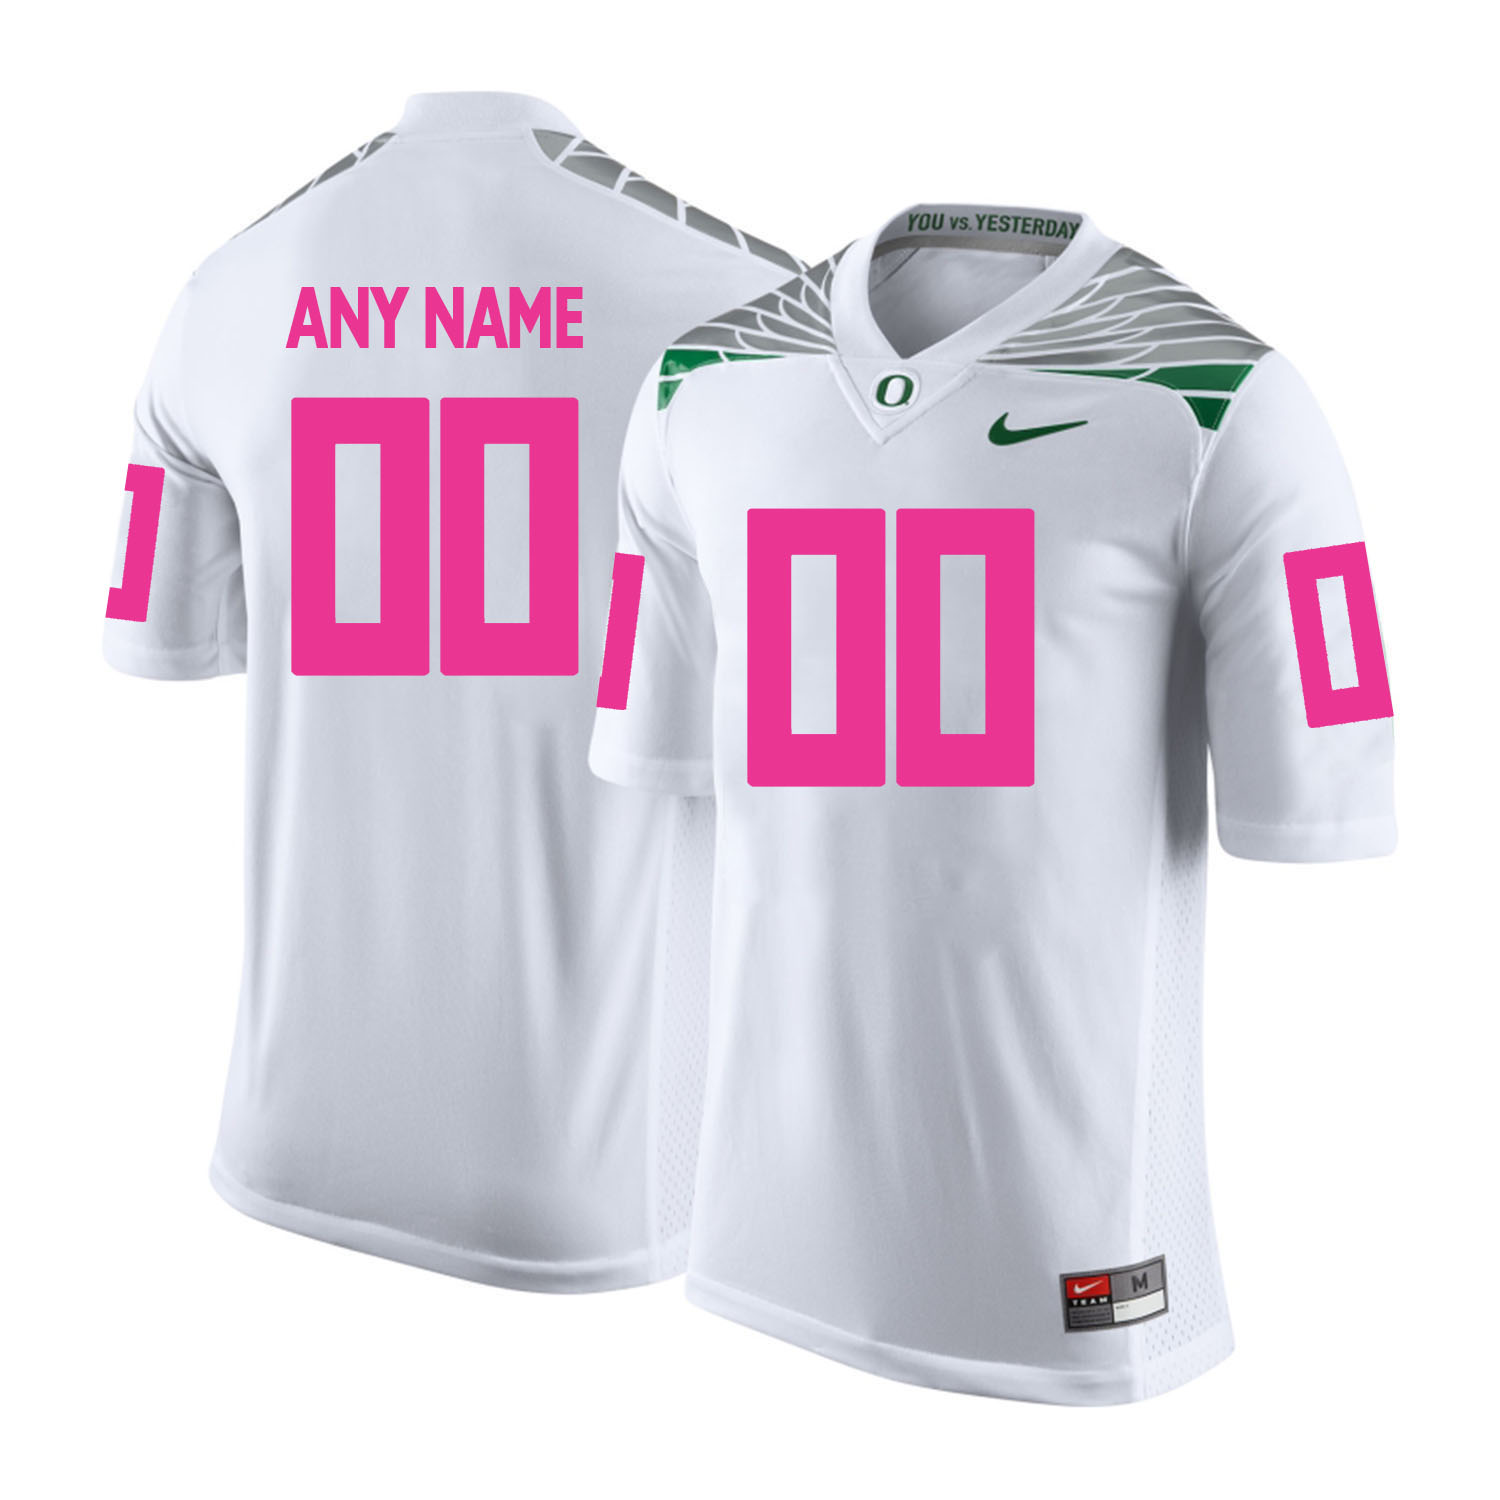 Oregon Ducks White Men's Customized 2018 Breast Cancer Awareness College Football Jersey